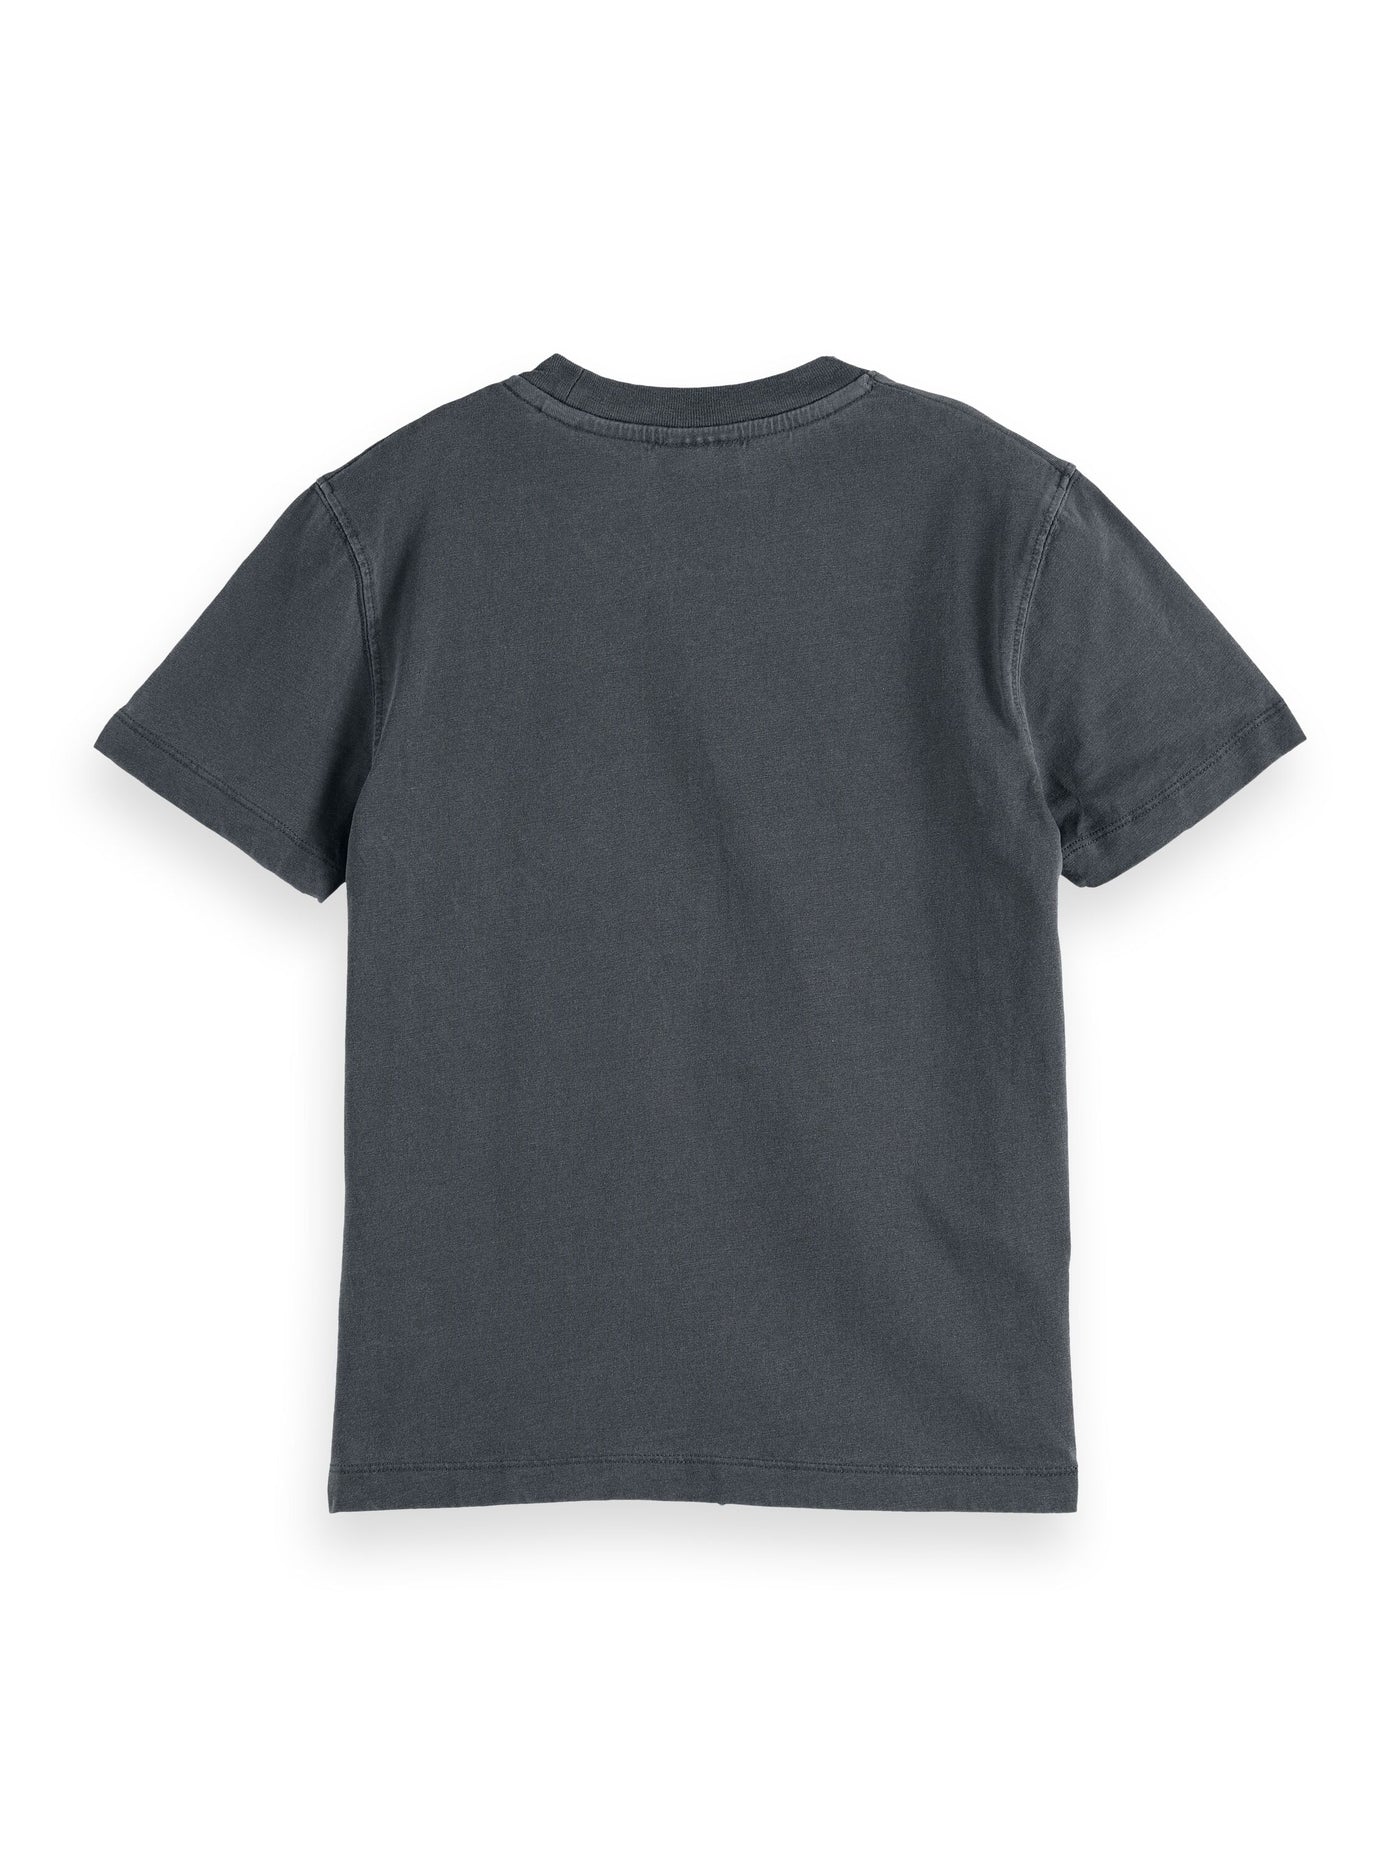 Relaxed Fit Garment Dyed T Shirt